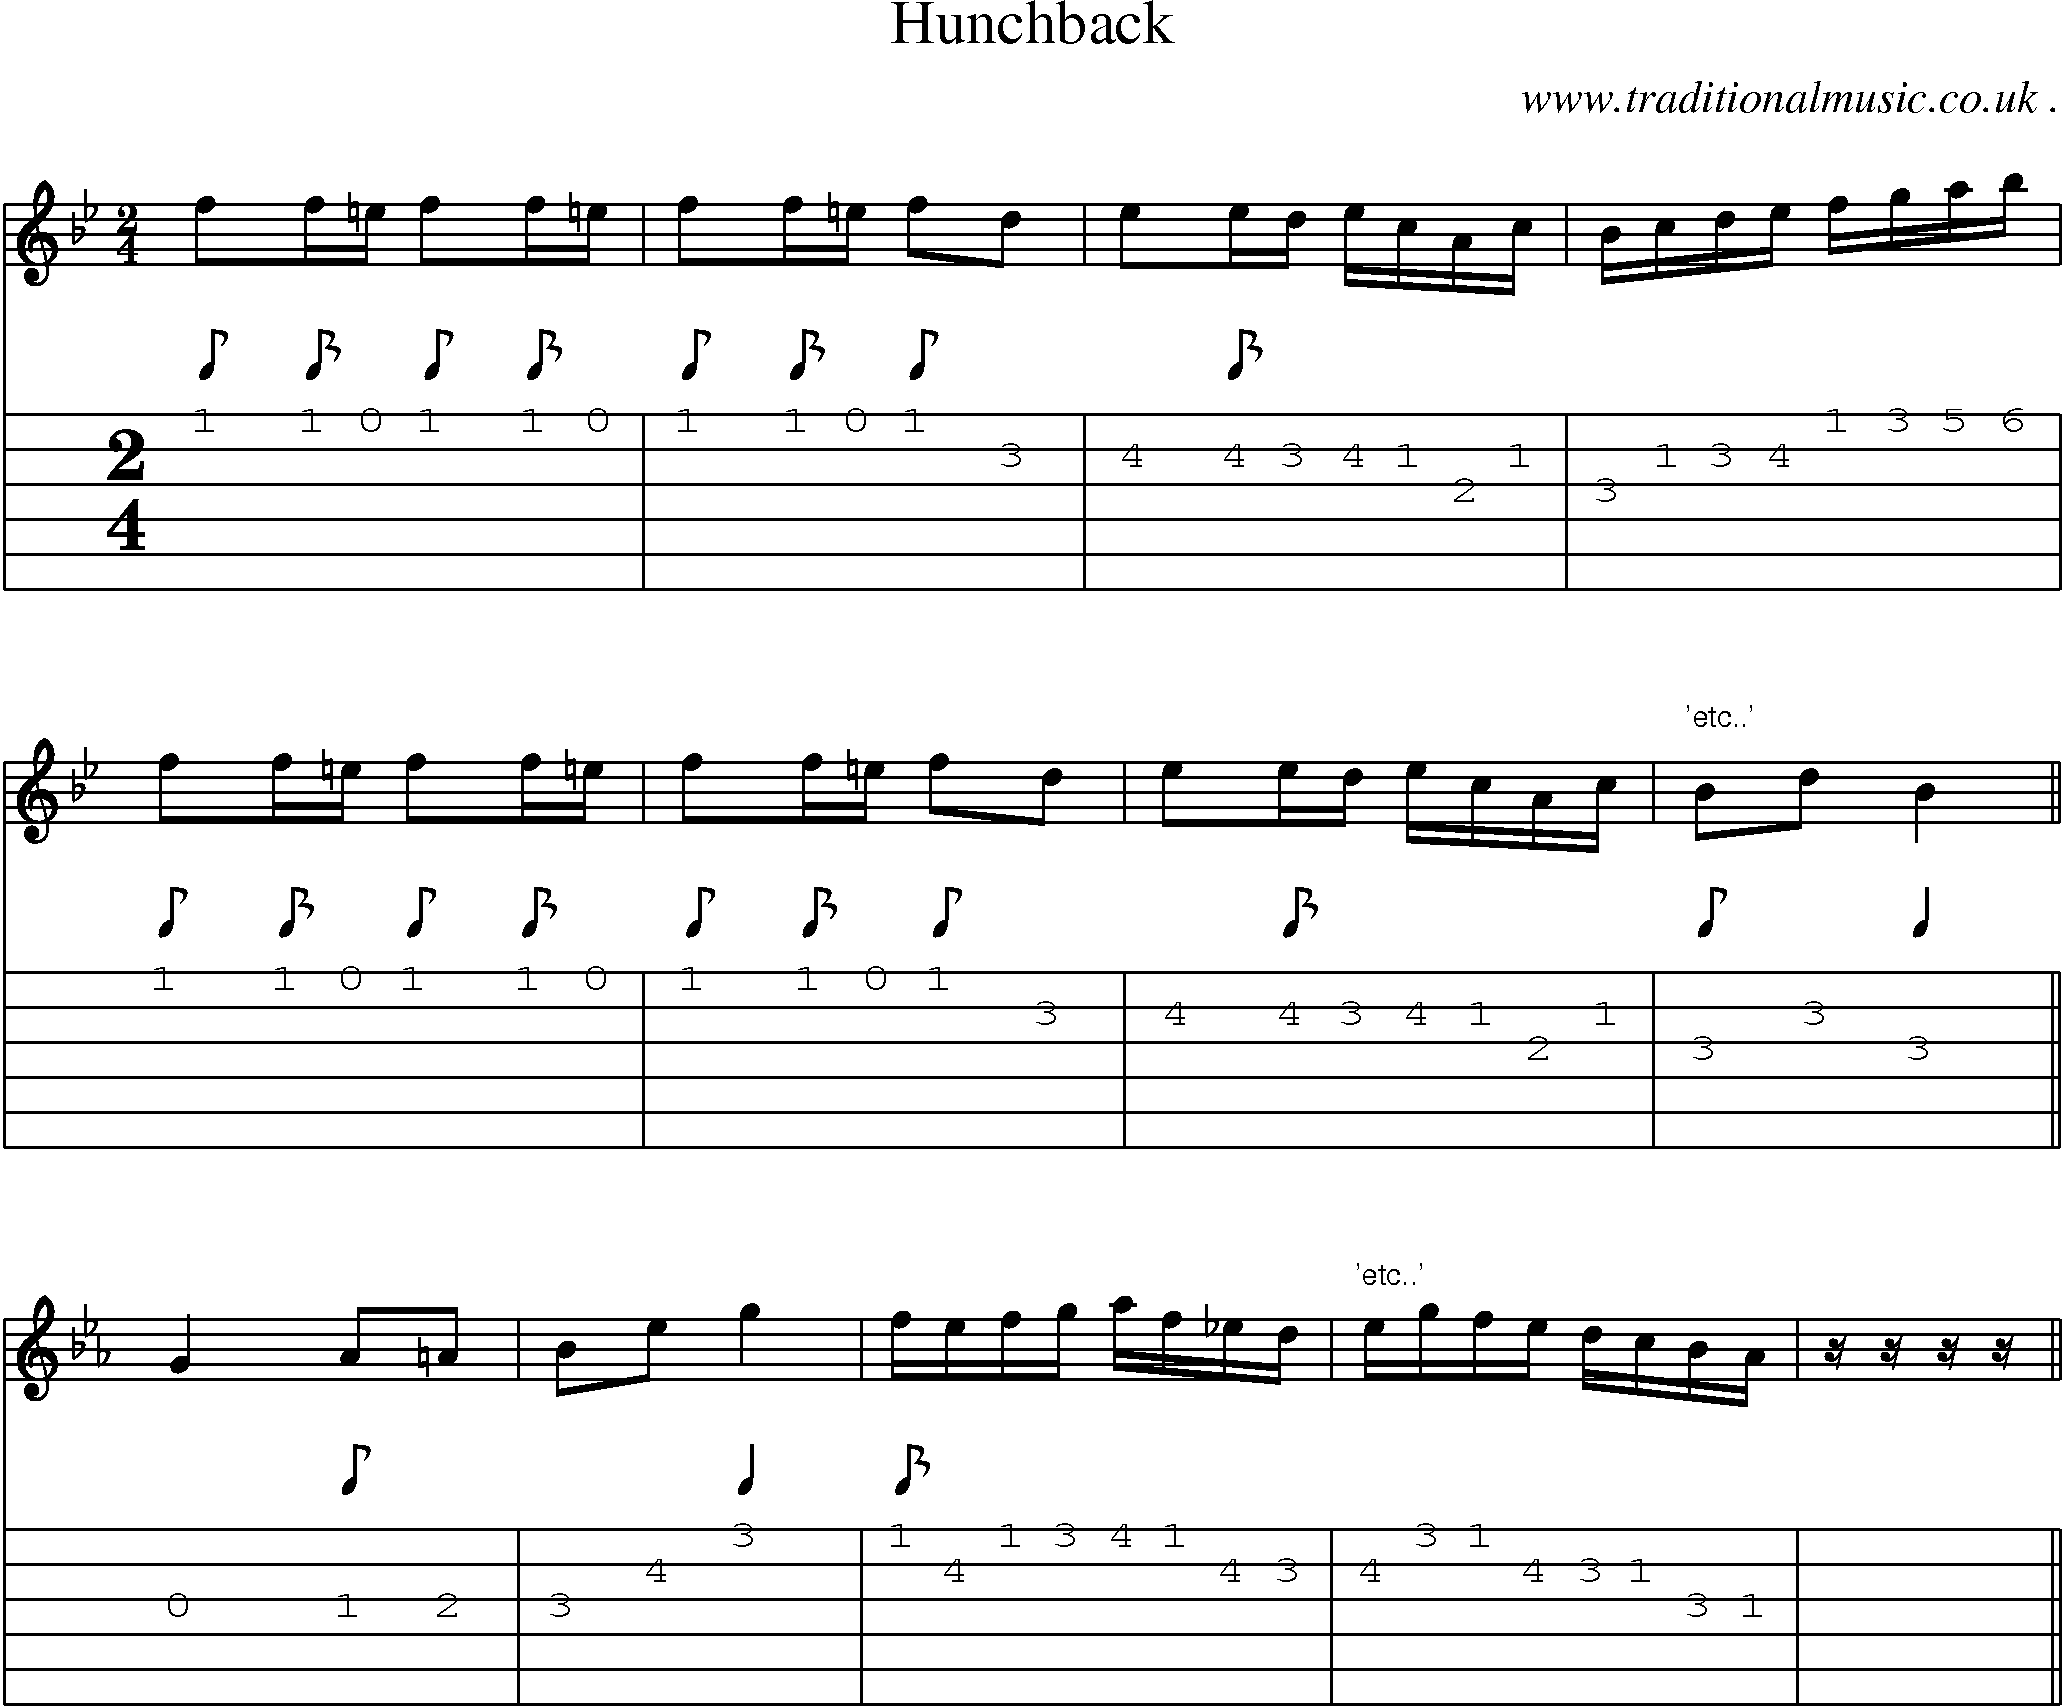 Sheet-Music and Guitar Tabs for Hunchback